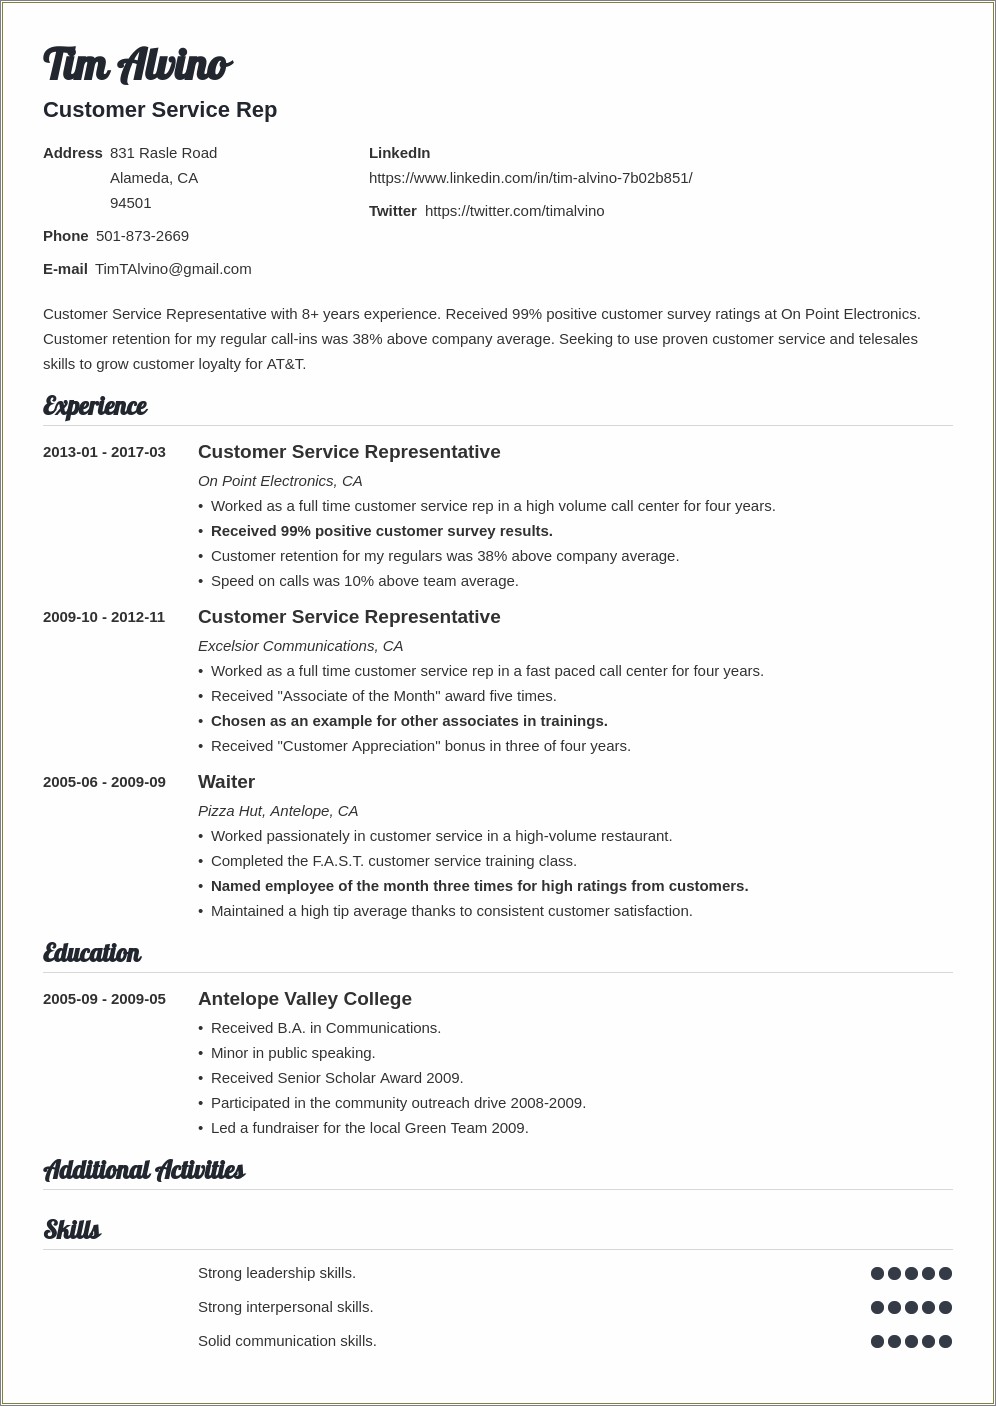 Resume Summary For Sales Support Representative